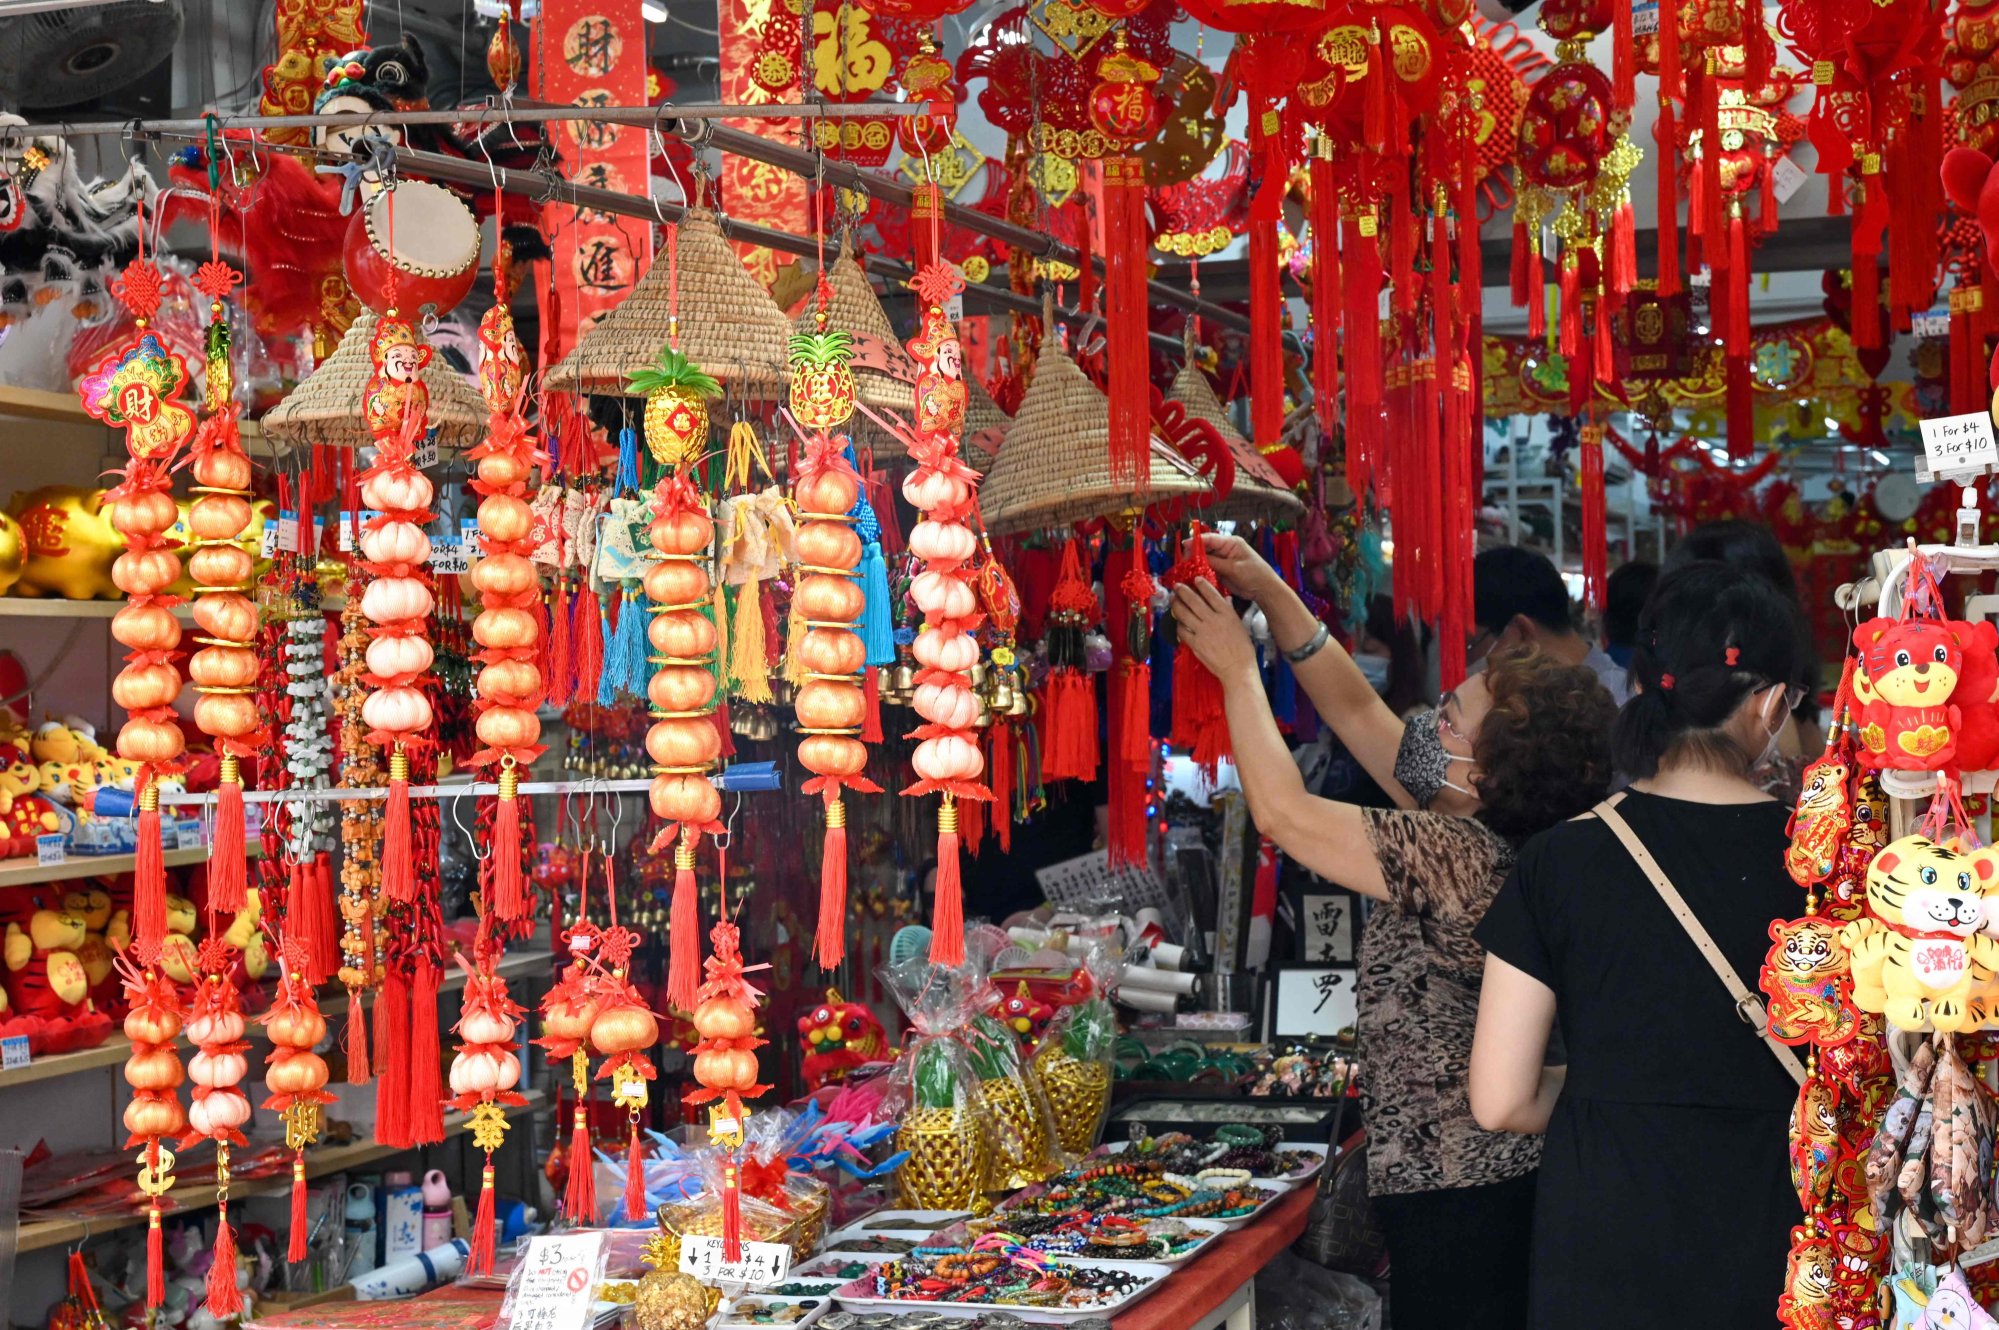 A woman looks at decorative ornaments on the eve of Lunar New Year in the Chinatown district of Singapore. Nair acknowledged that he knew the Chinese community would find his YouTube video offensive. Photo: AFP